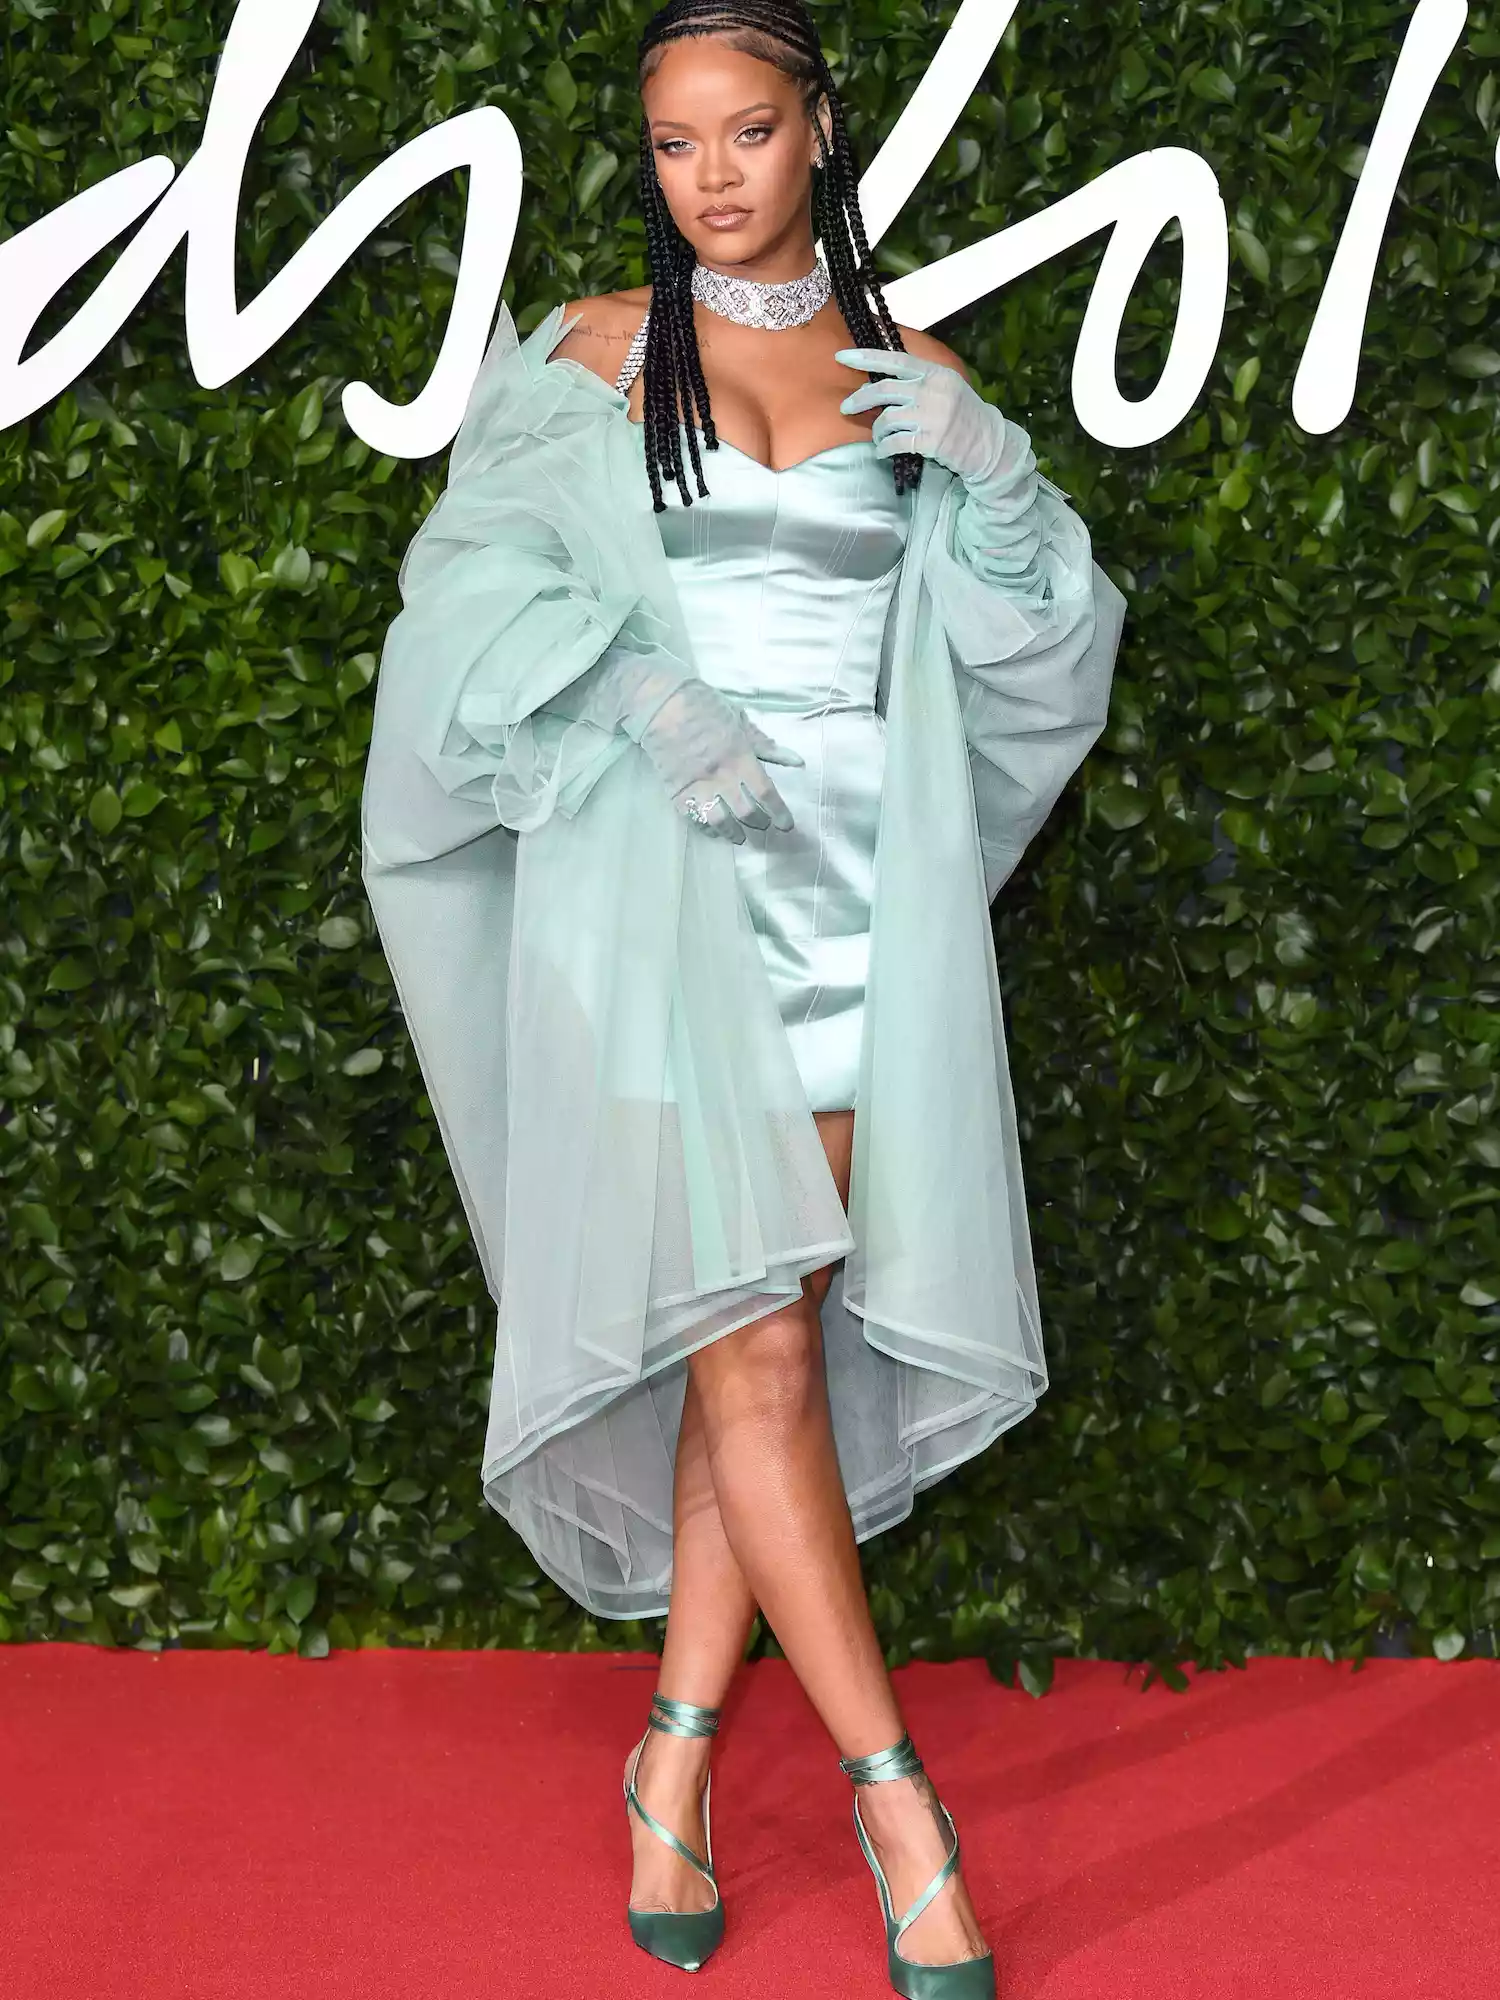 Rihanna wears a mint minidress and coat set by Fenty to the 2019 Fashion Awards in London